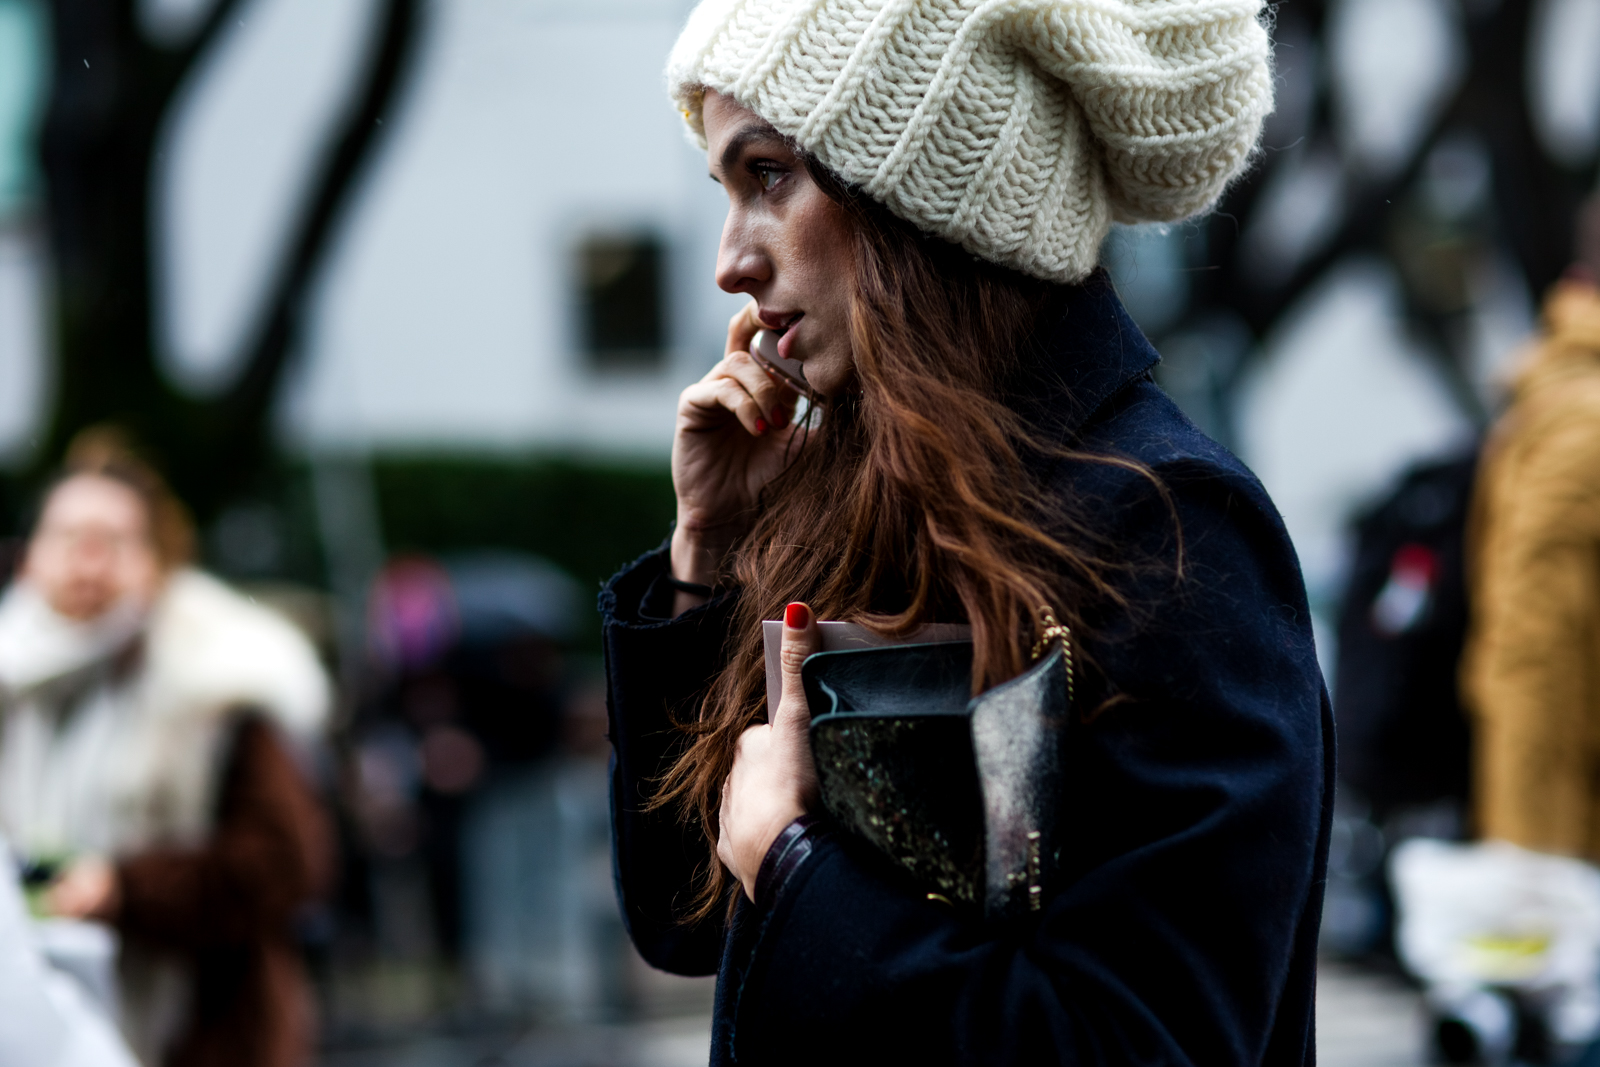 Erika Boldrin wearing a navy coat and white beanie hat before the Armani fashion show in Milan, Italy